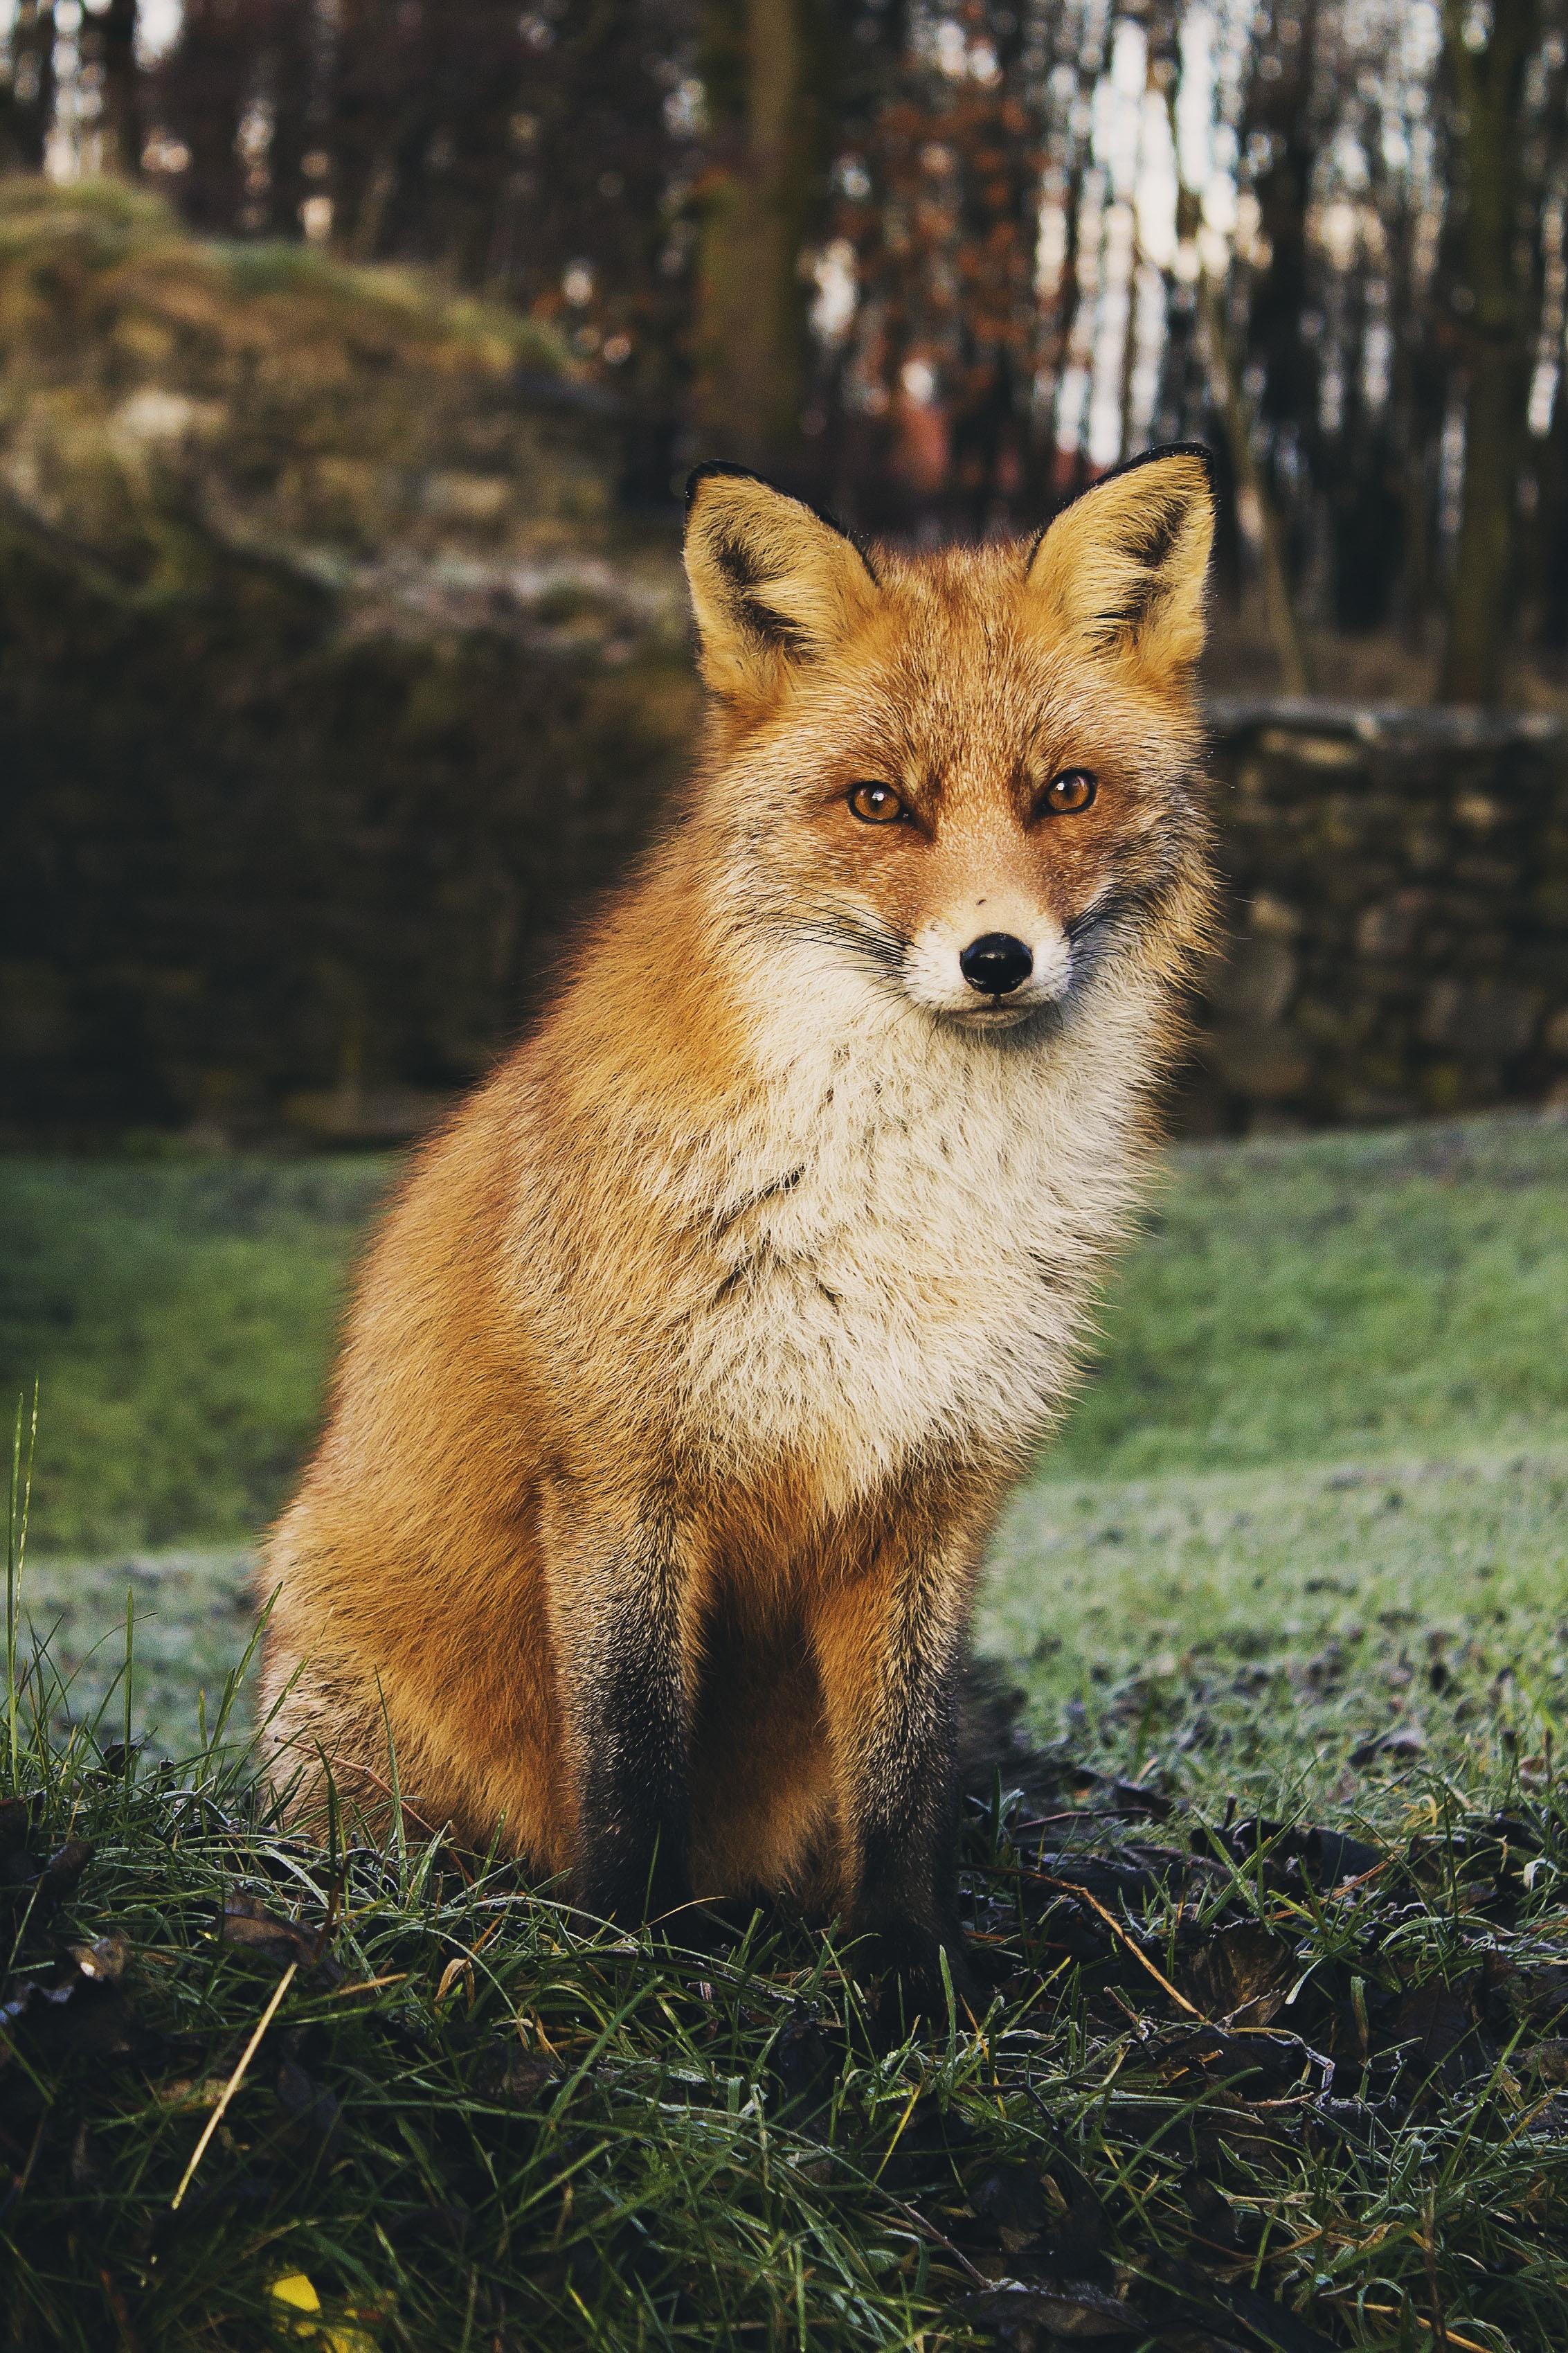 A Red Fox image - Free stock photo - Public Domain photo - CC0 Images